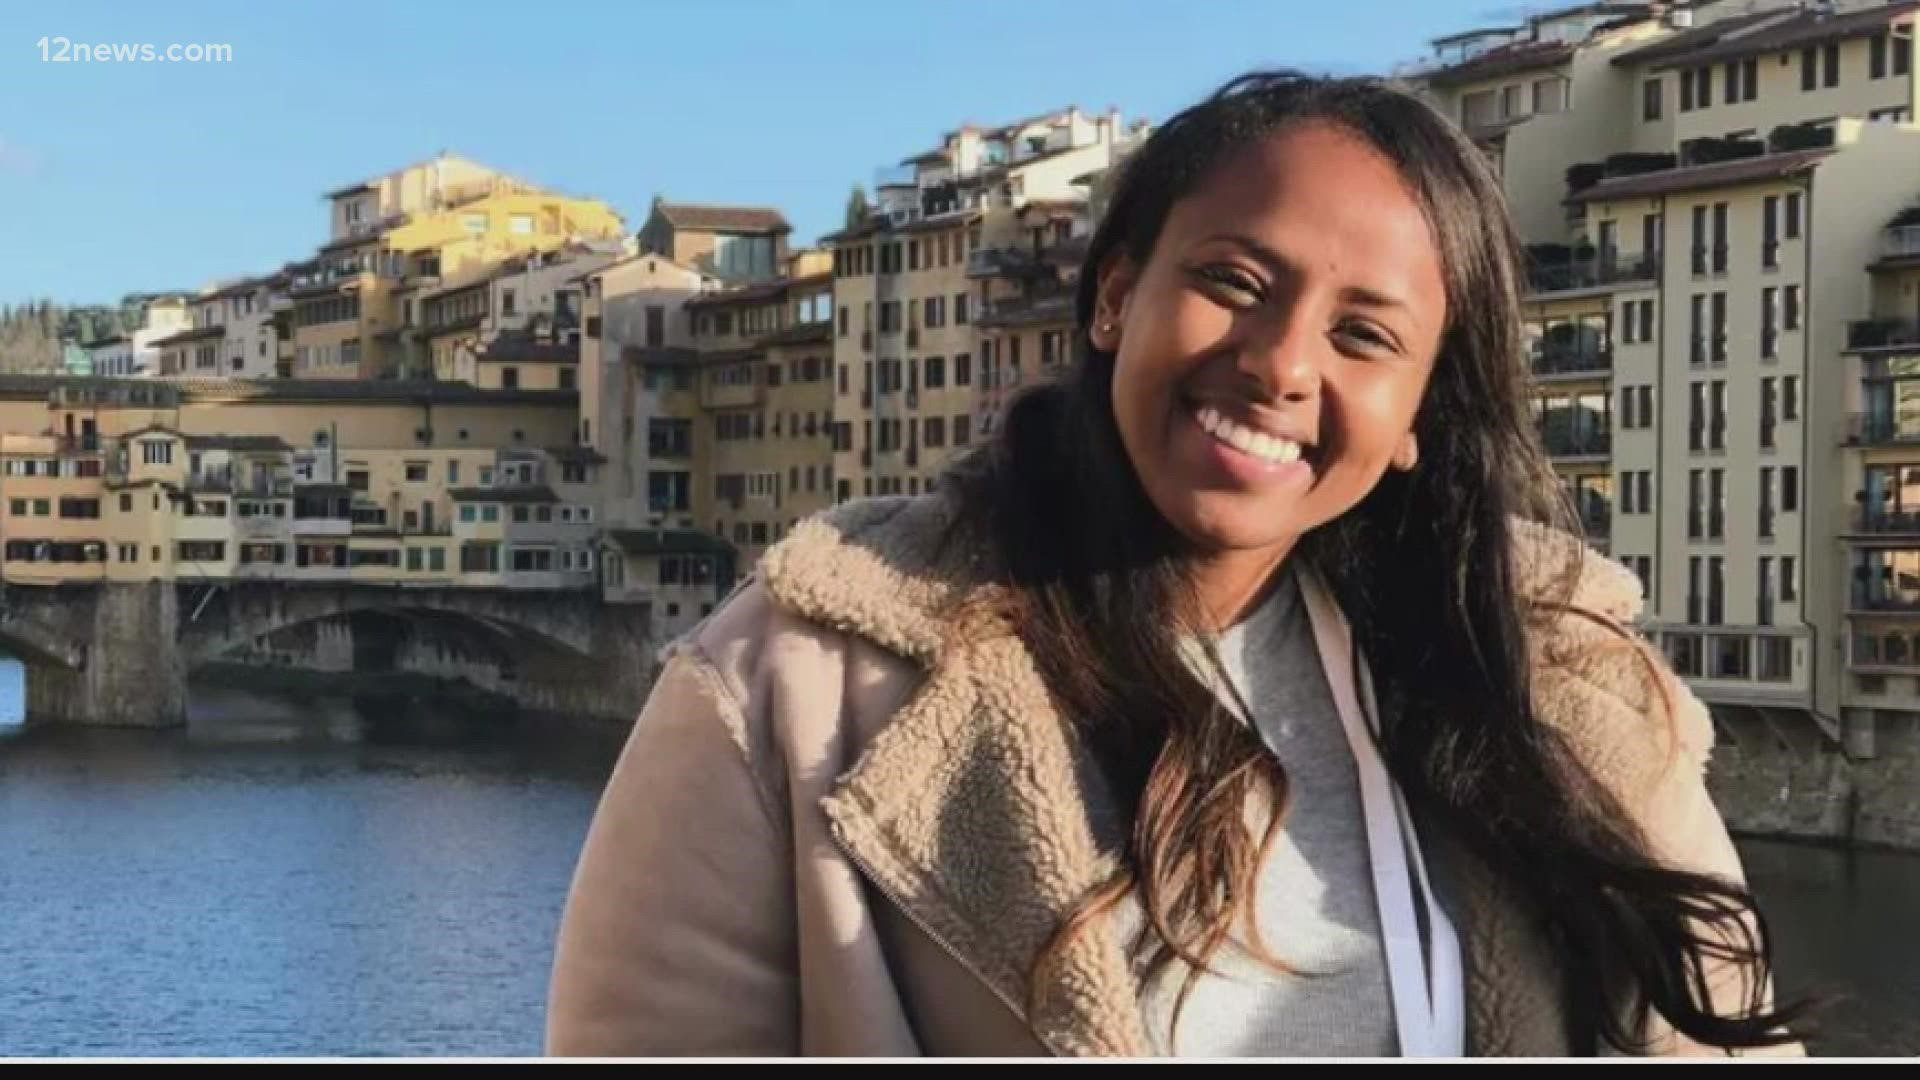 Saron Berhe, 28, was in her last year of law school at Howard University. She immigrated to the Valley from Eritrea at 3 years old.